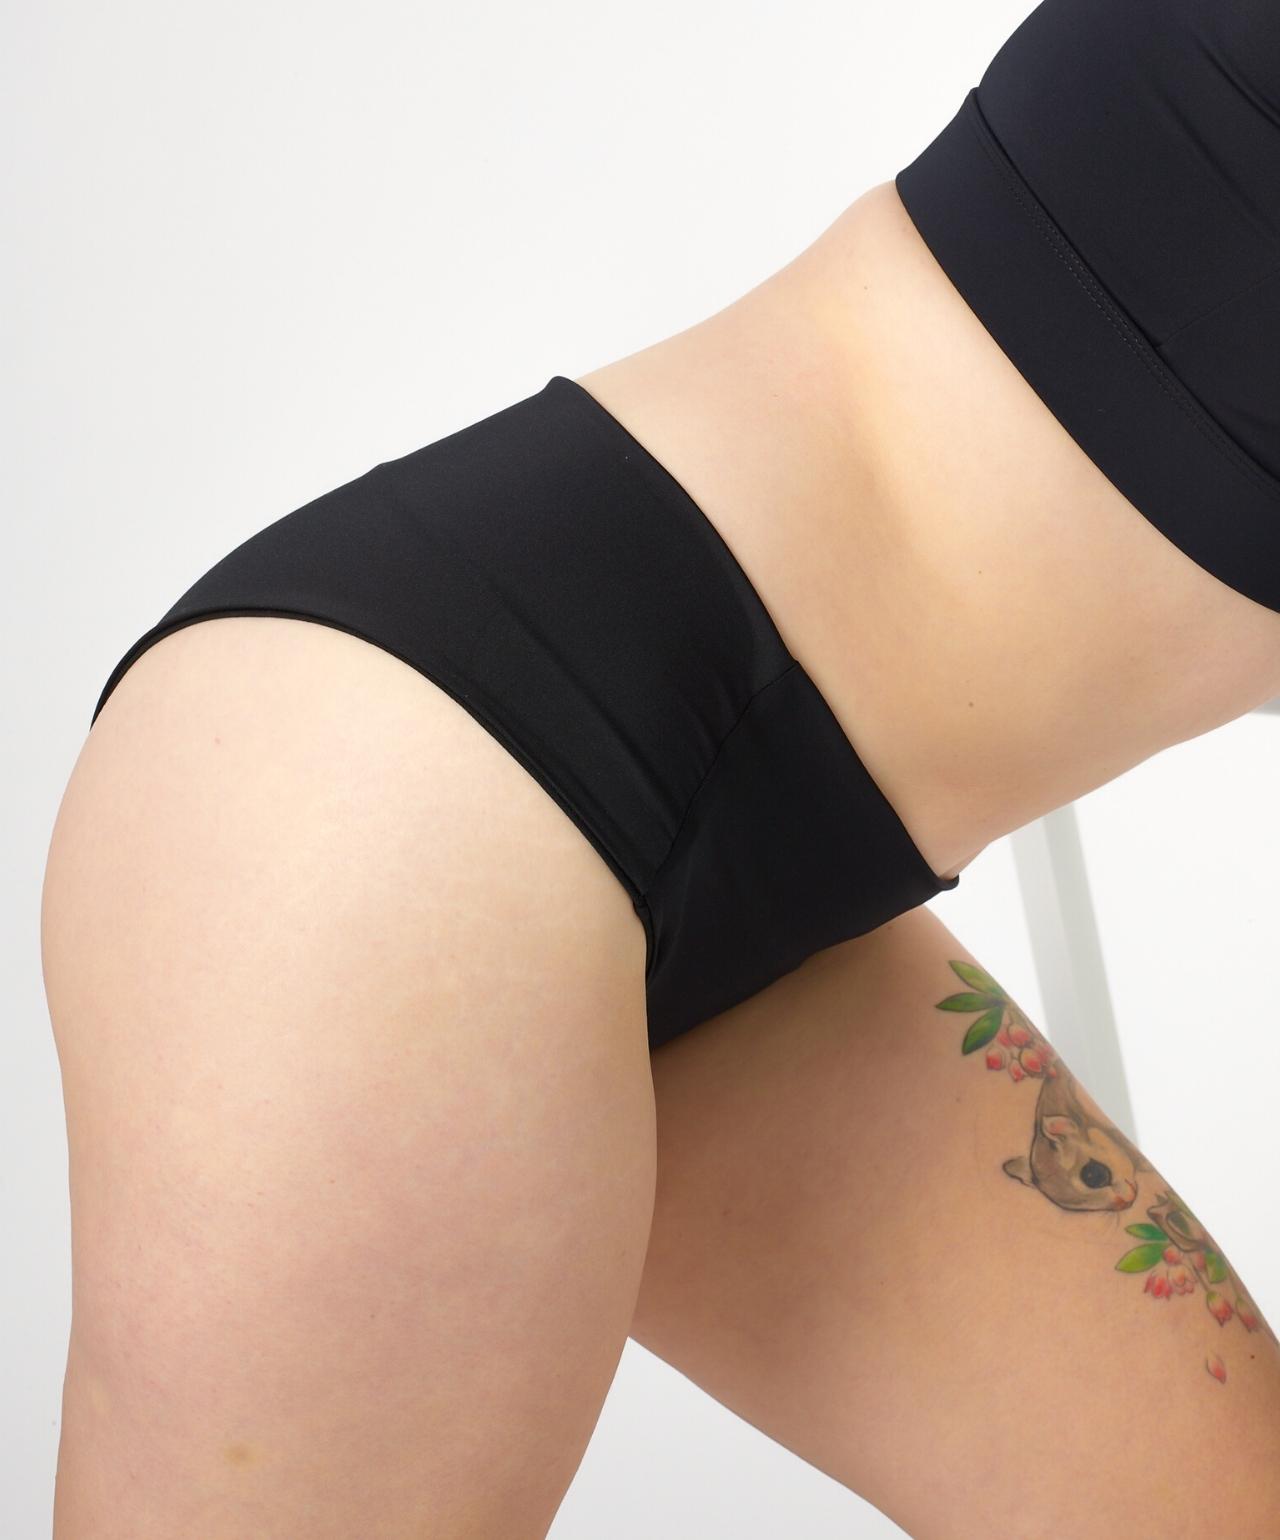 Nyssa VieWear Period Comfort Underwear, FSA/HSA Eligible, Pocketed to Hold  Heat Relief Lined with Organic Cotton